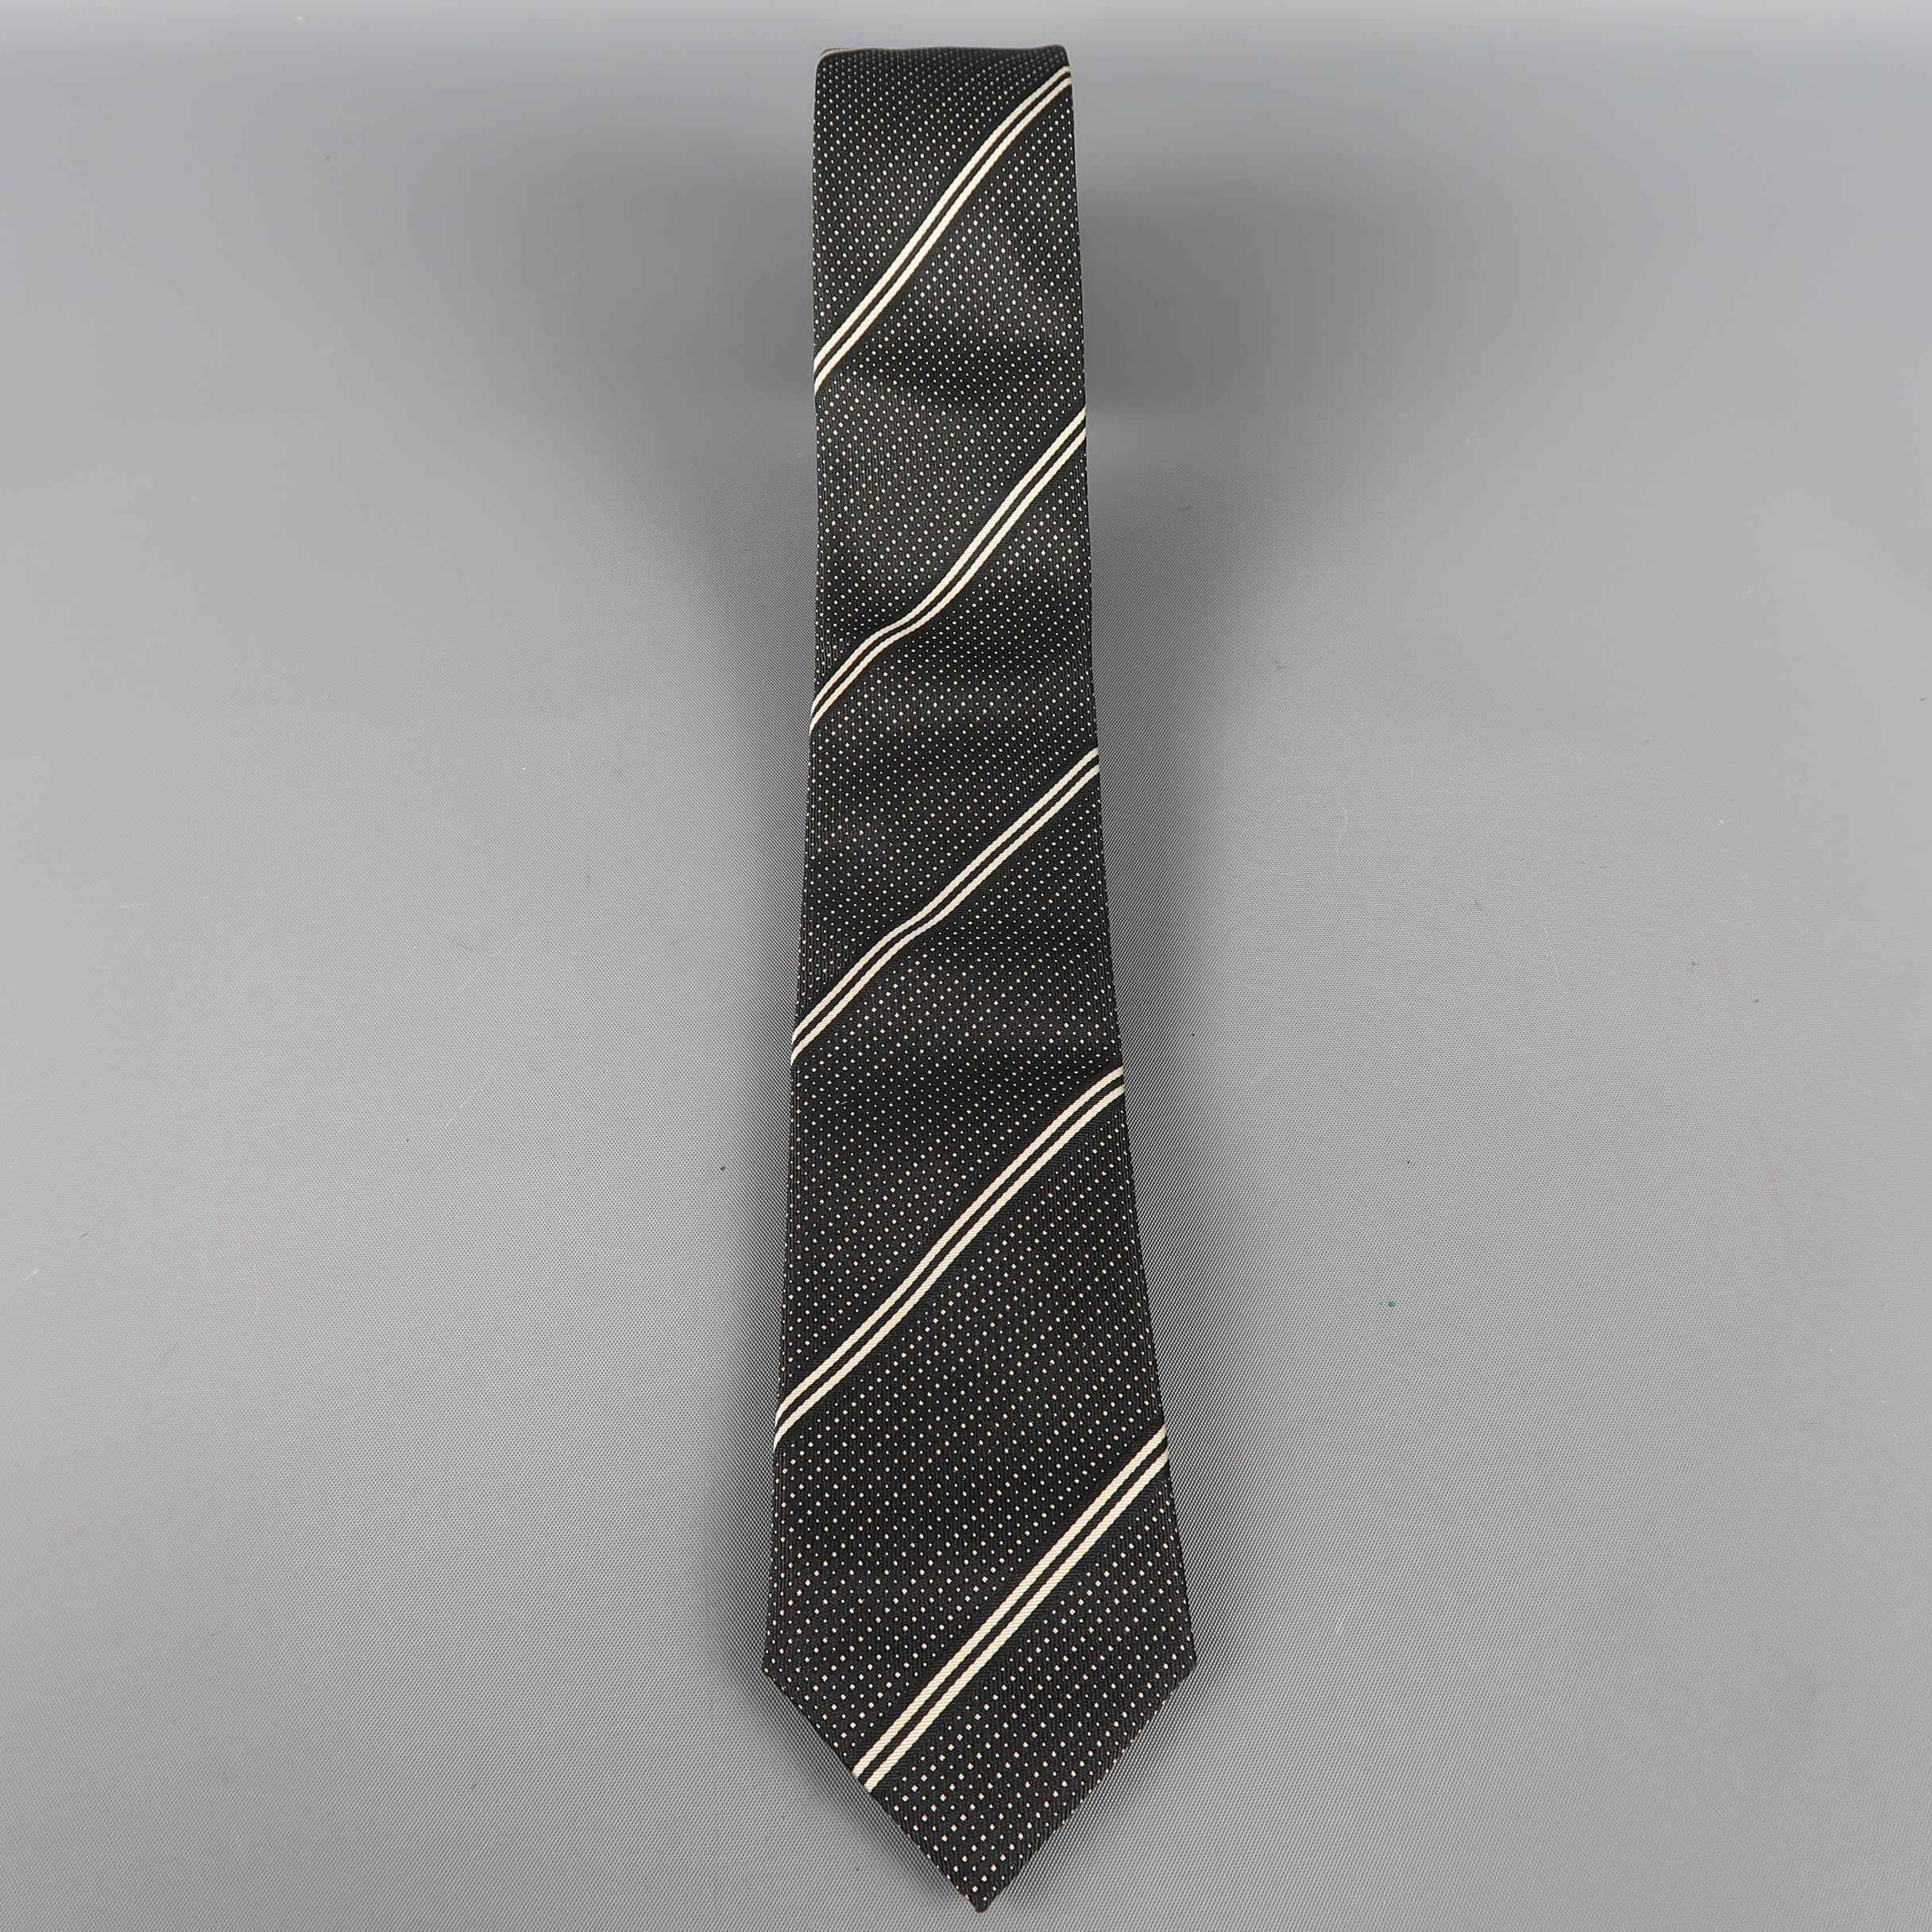 PRADA tie come in black silk  with diagonal silver stripes and dots. Made in Italy.
 
Excellent Pre-Owned Condition.
 
Width: 2.5 in.